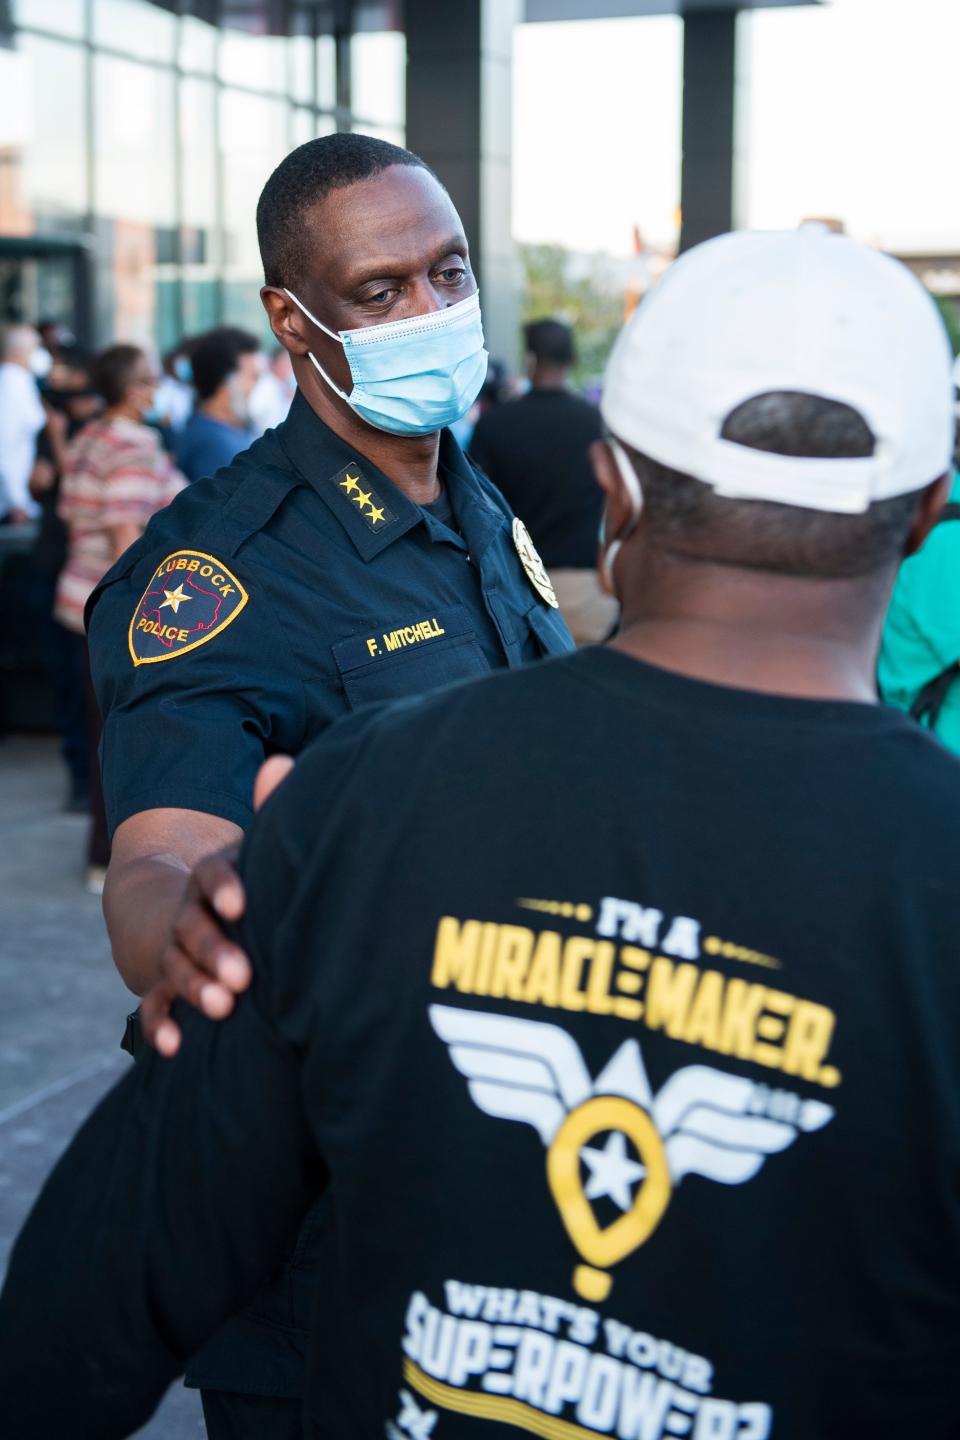 Lubbock Police Chief Floyd Mitchell greets a member of the community at Citizen's Tower after the Silent Solidarity Walk on Monday, June 1, 2020, in Lubbock. The Silent Solidarity Walk was organized by 100 Black Men of West Texas to protest police brutality in the wake of the death of George Floyd in Minneapolis.